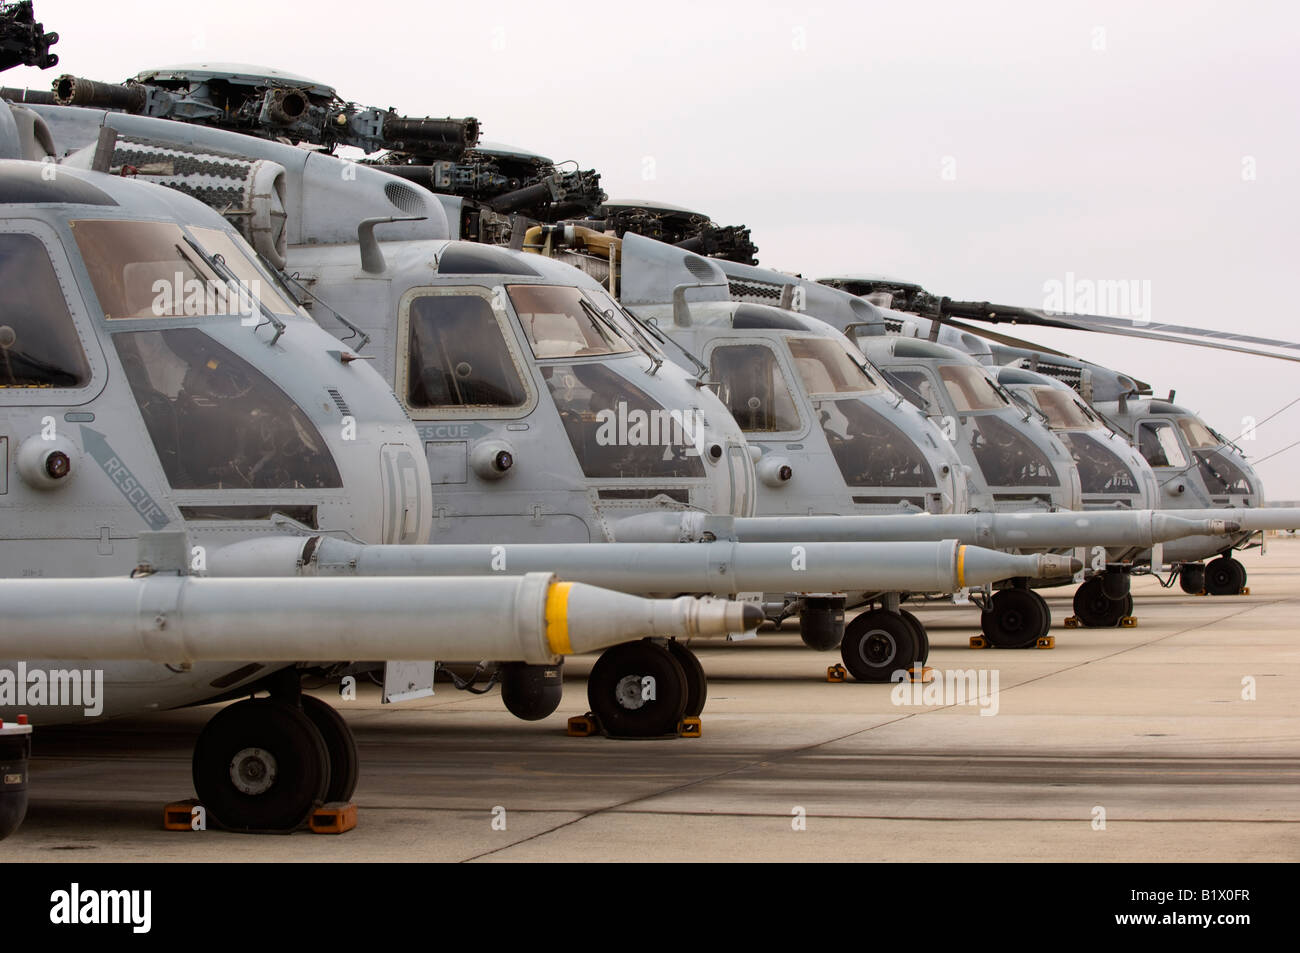 Military Helicopters lined up in a row Stock Photo